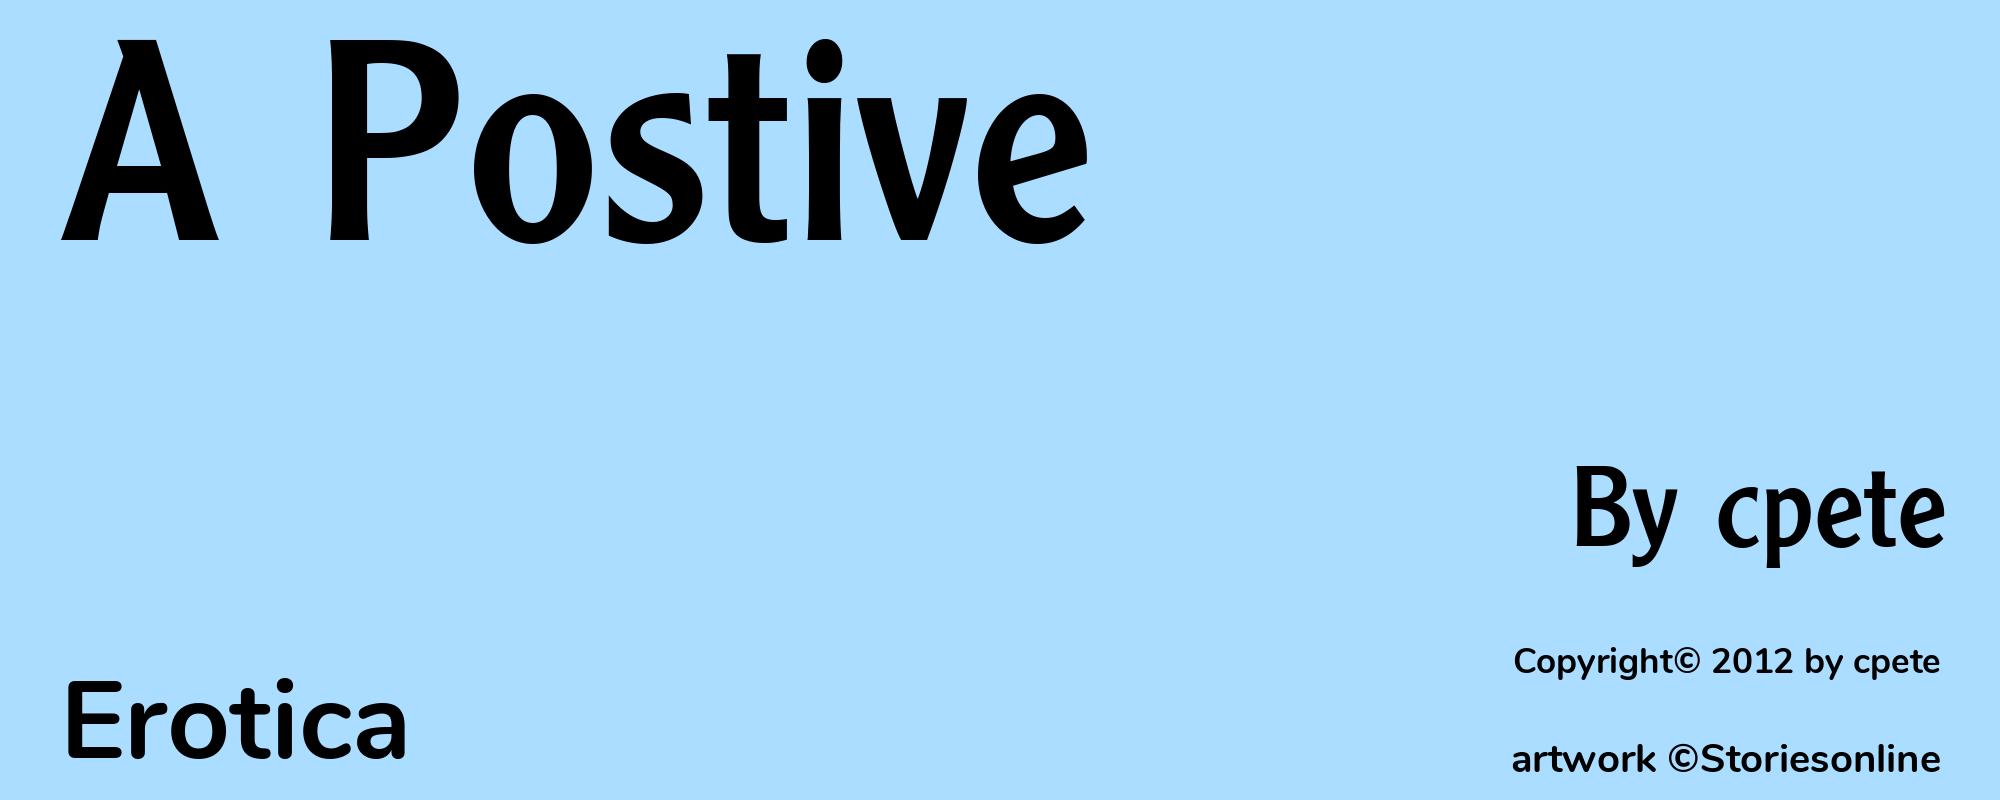 A Postive - Cover